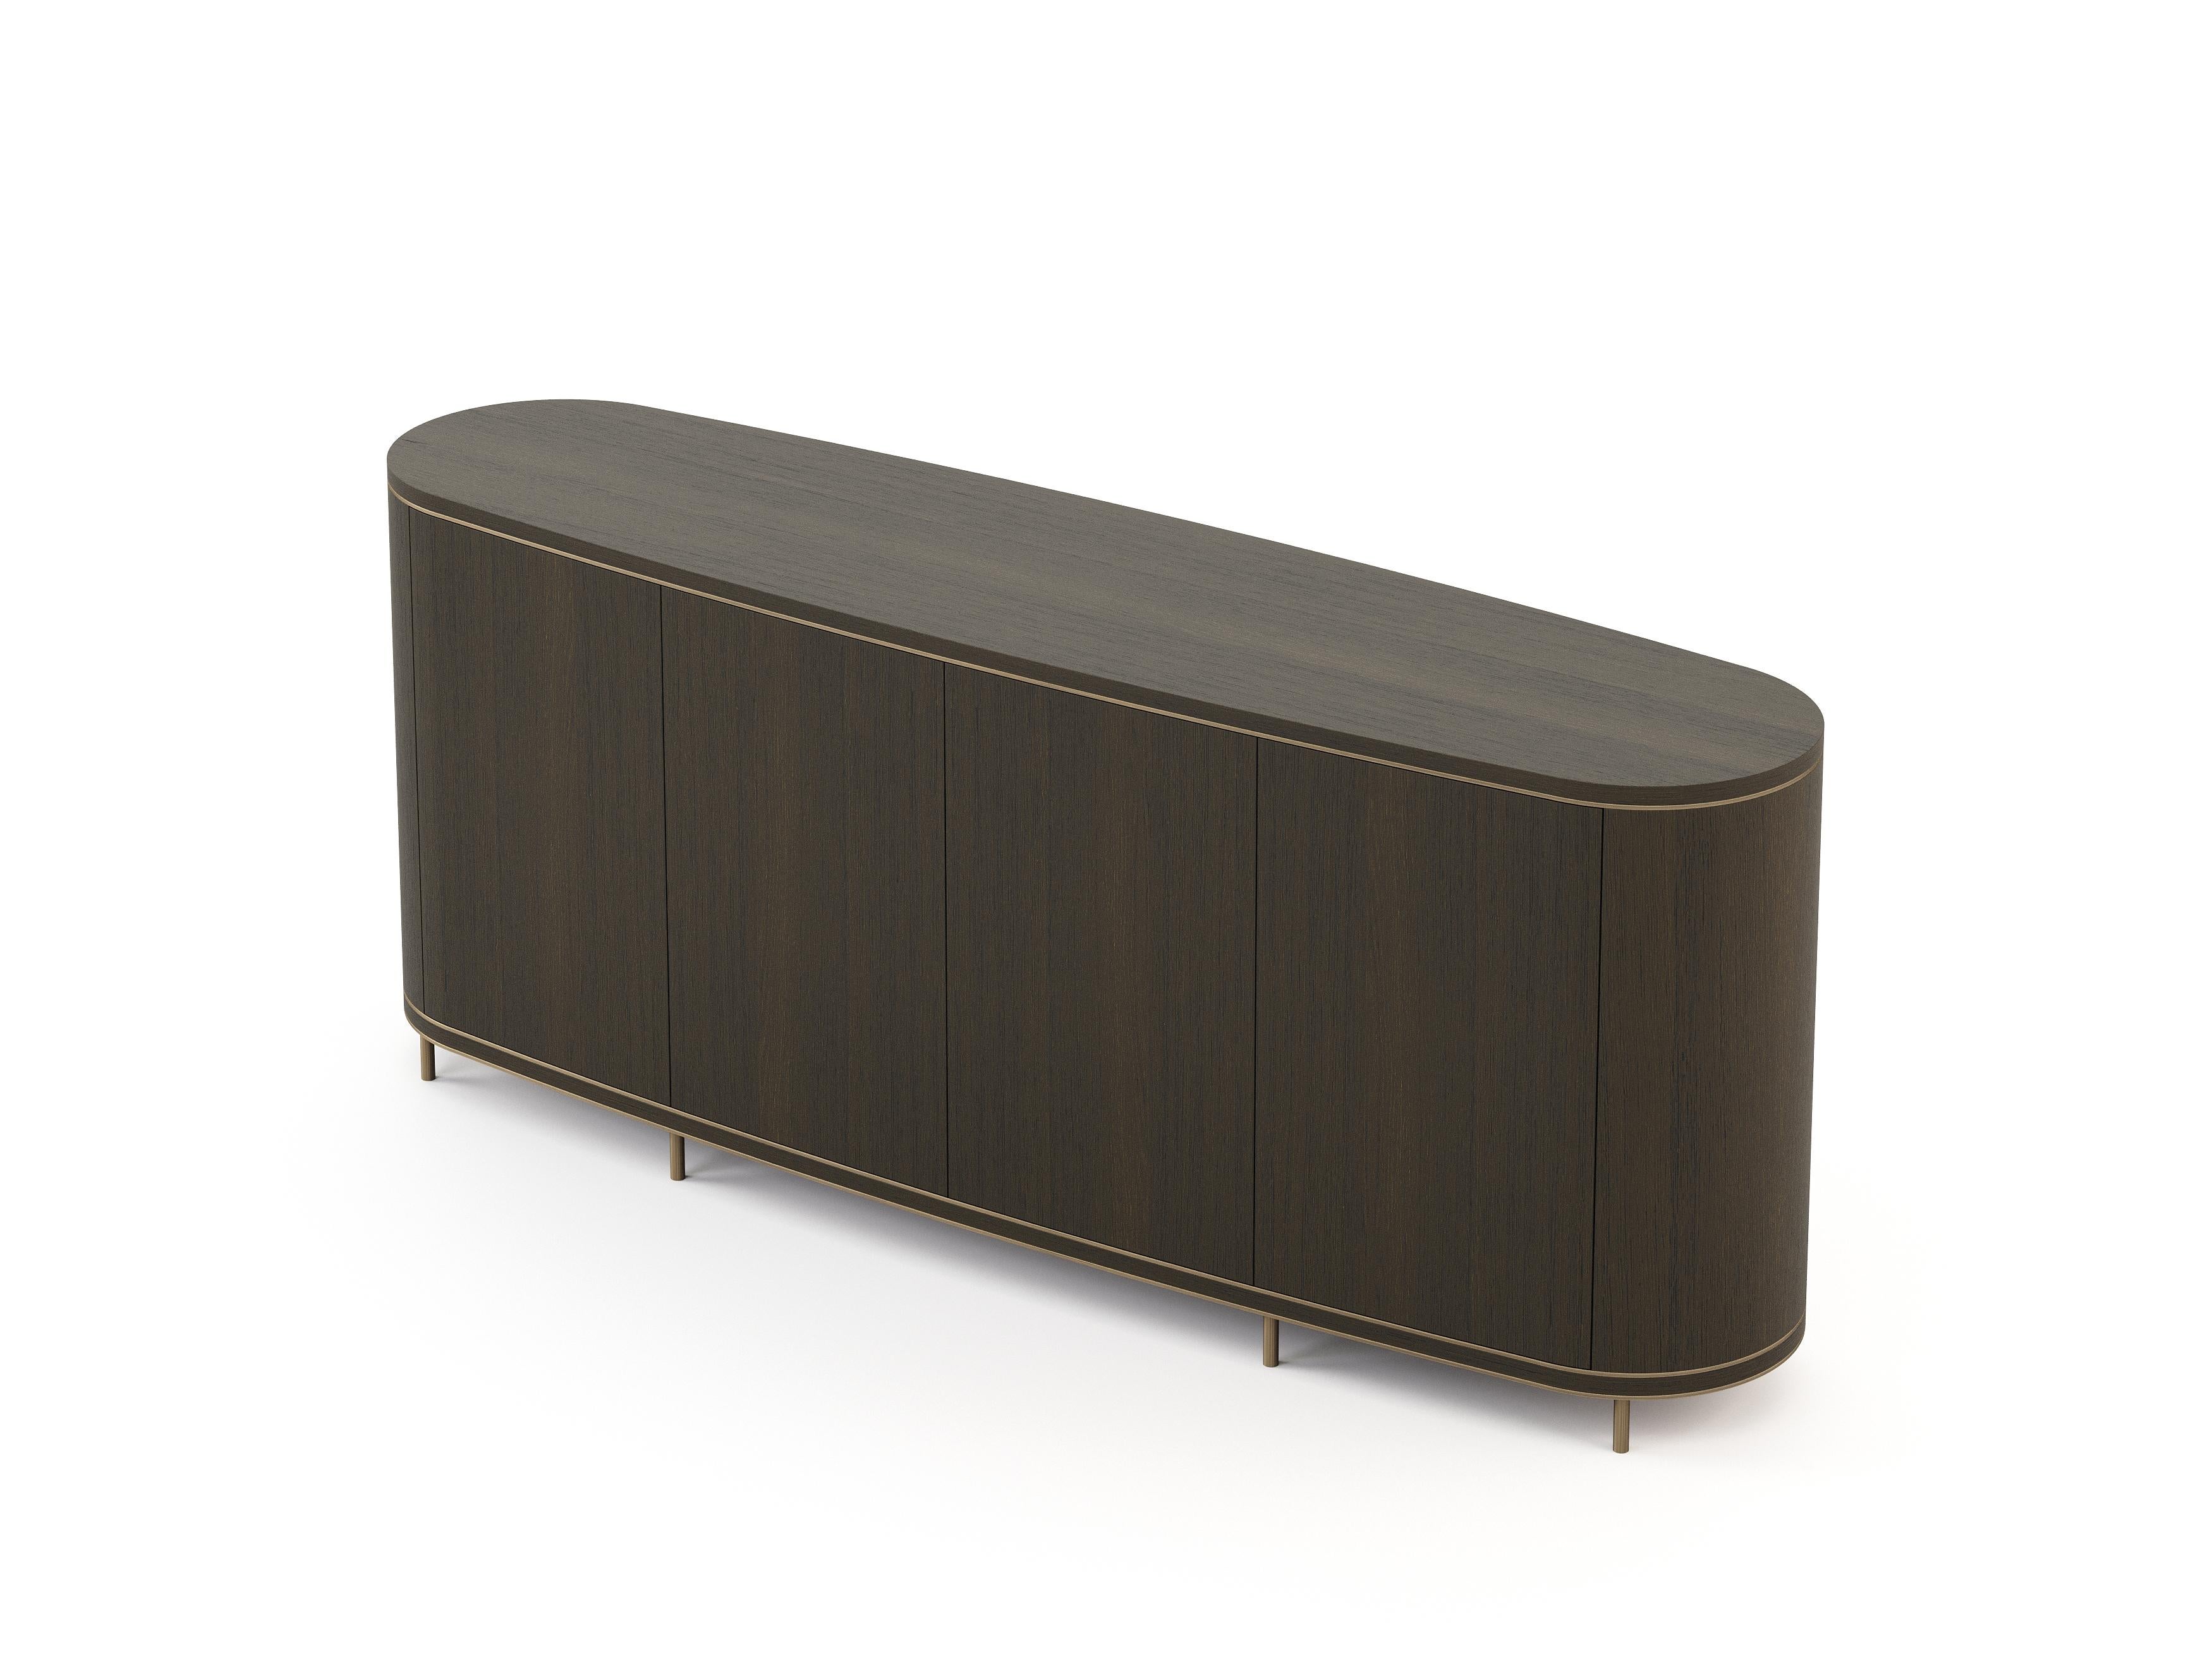 Portuguese Modern Cannes Sideboard Made with Oak and Brass, Handmade by Stylish Club For Sale